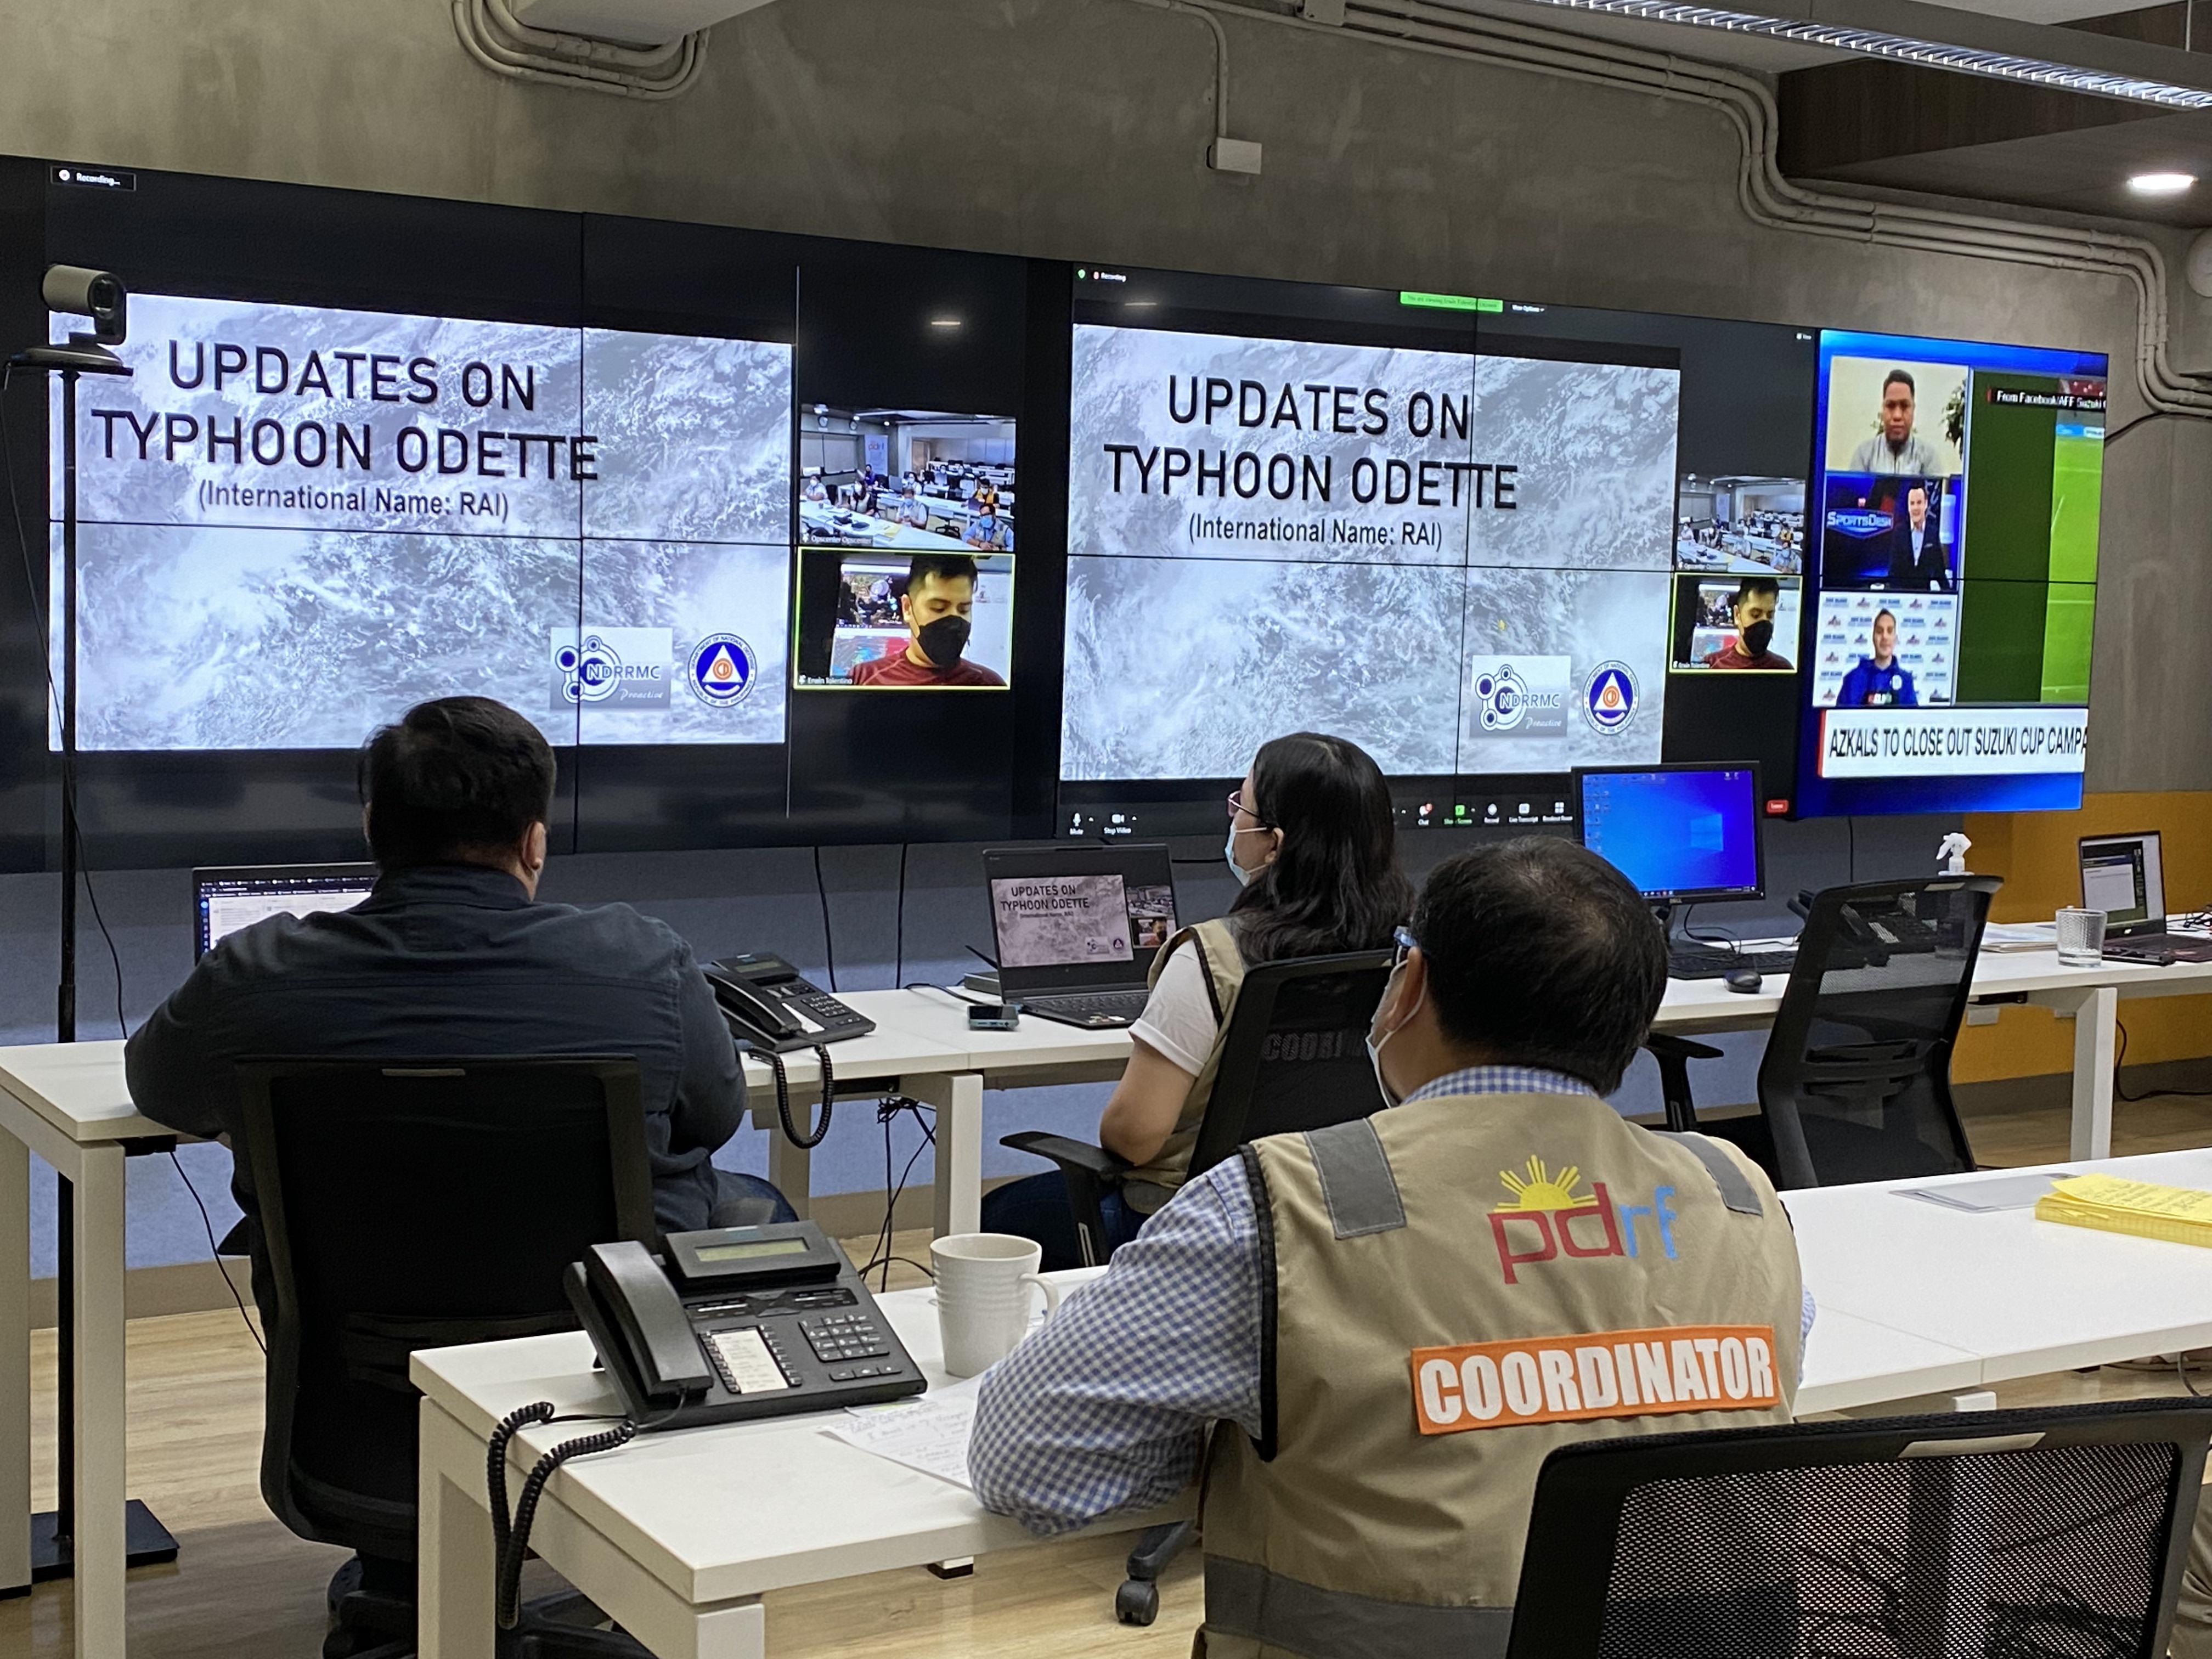 PDRF is coordinating the private sector response to the Super Typhoon Rai / #OdetteRH in December 2021 through their private sector-led Emergency Operations Center. Photo credit: The PDRF